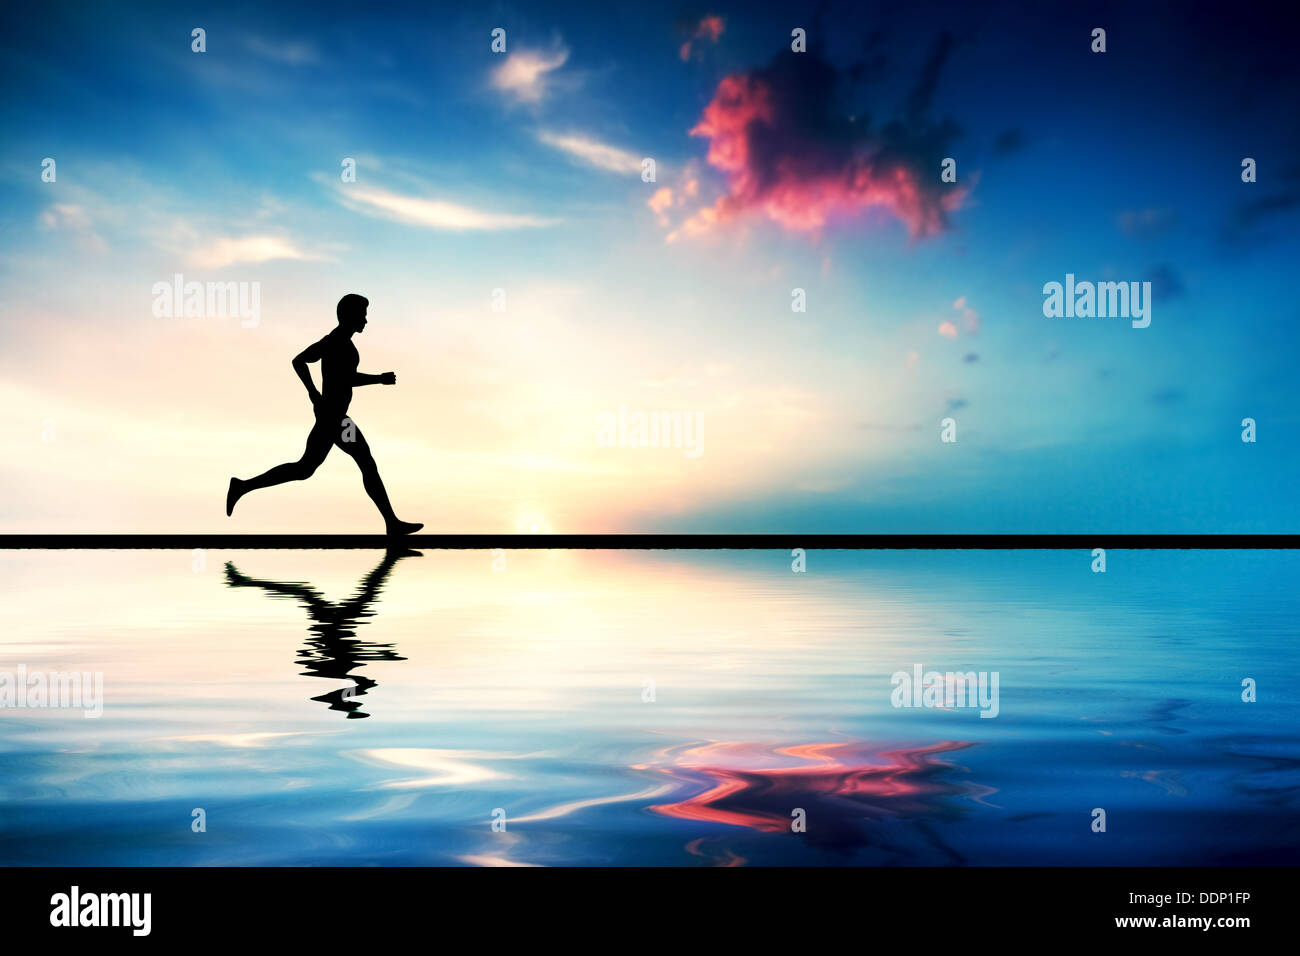 Silhouette of man running at sunset by water Stock Photo